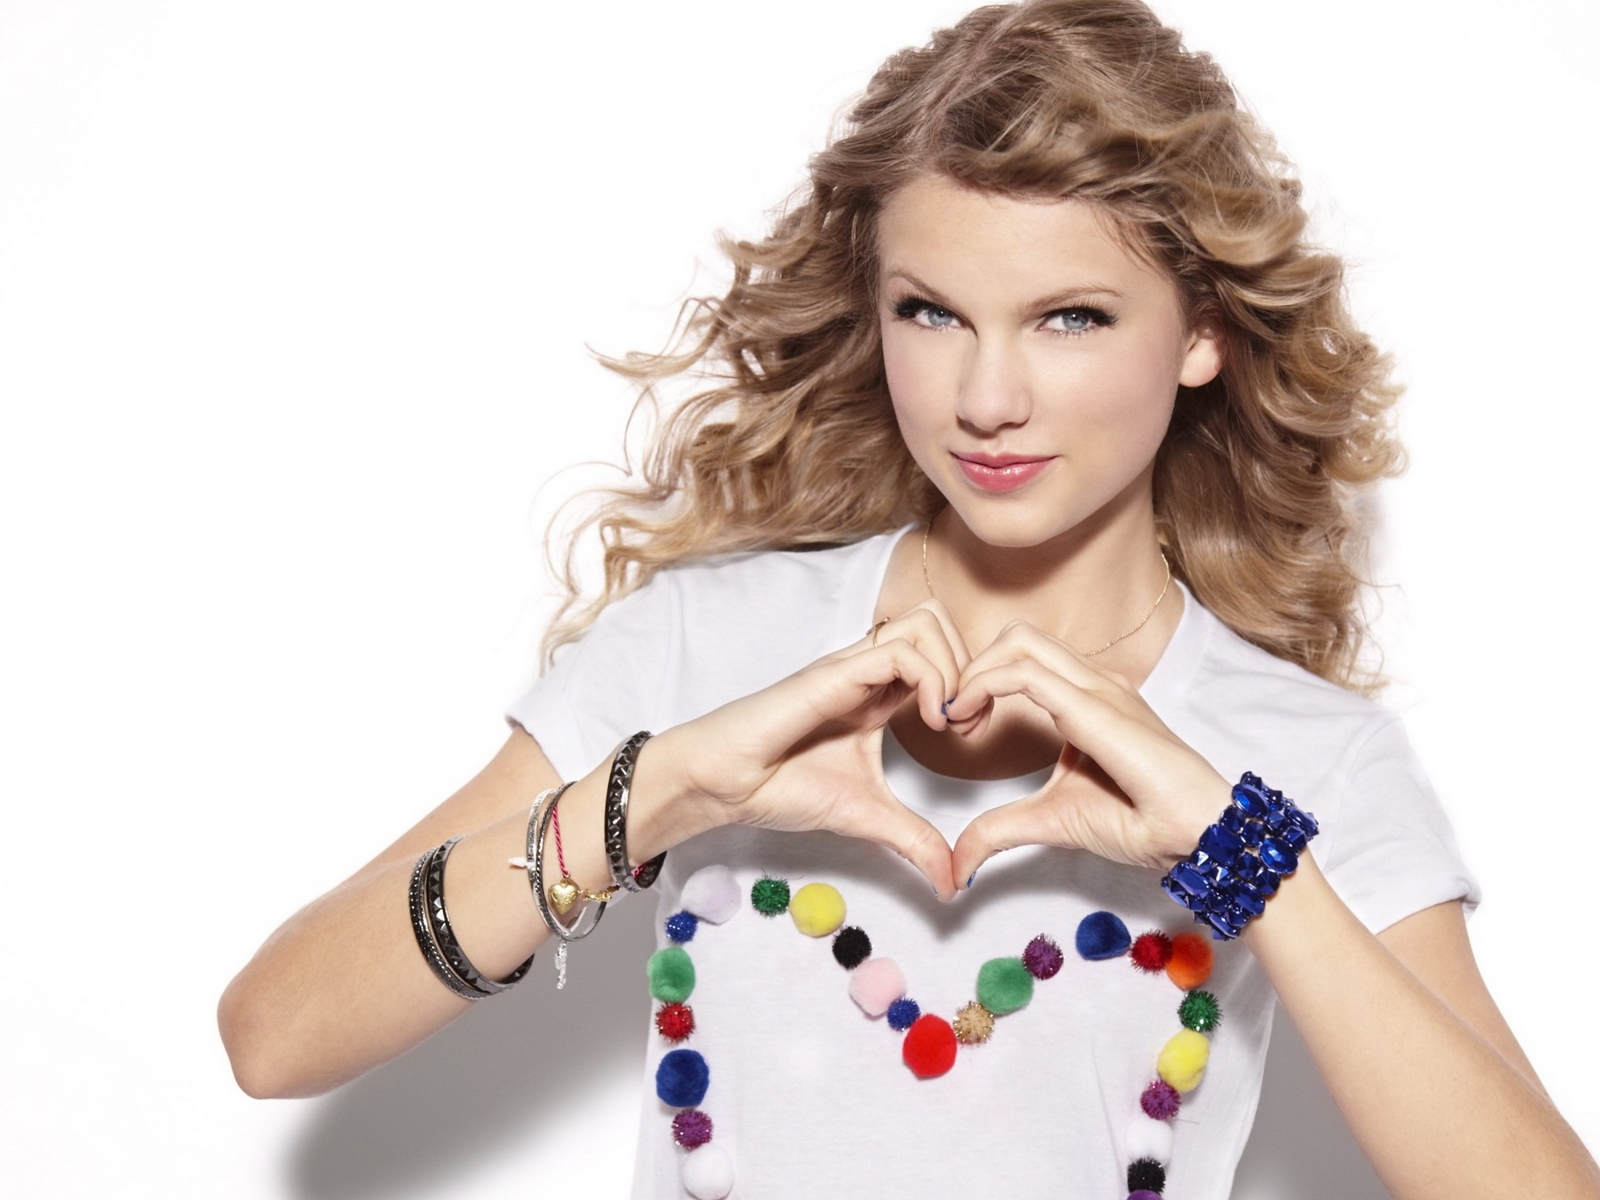 Taylor Swift Wallpapers For Mobile Hd Backgrounds